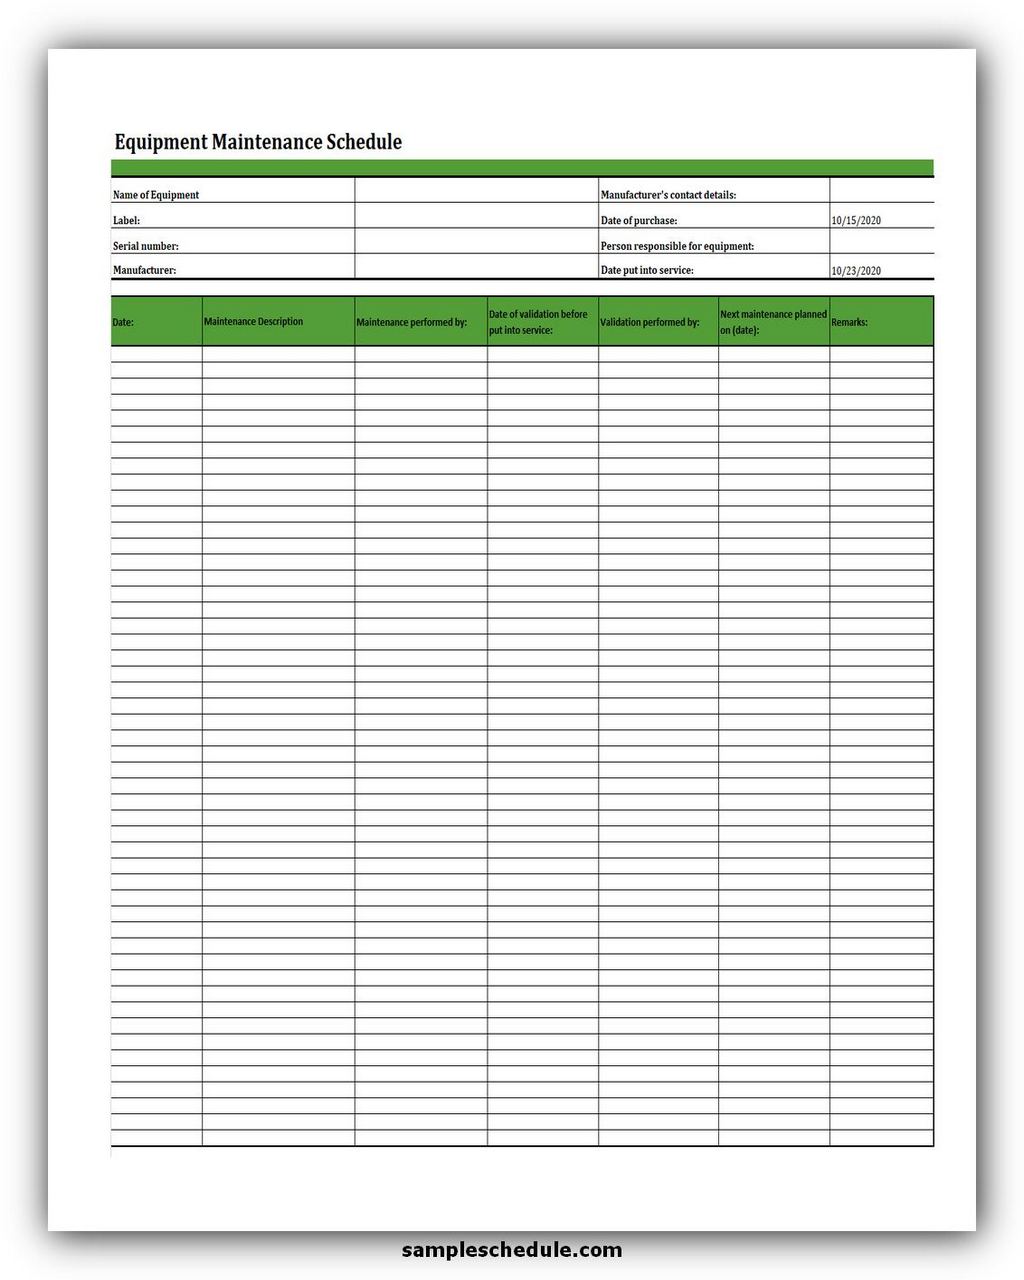 preventive-maintenance-schedule-template-excel-free-of-planned